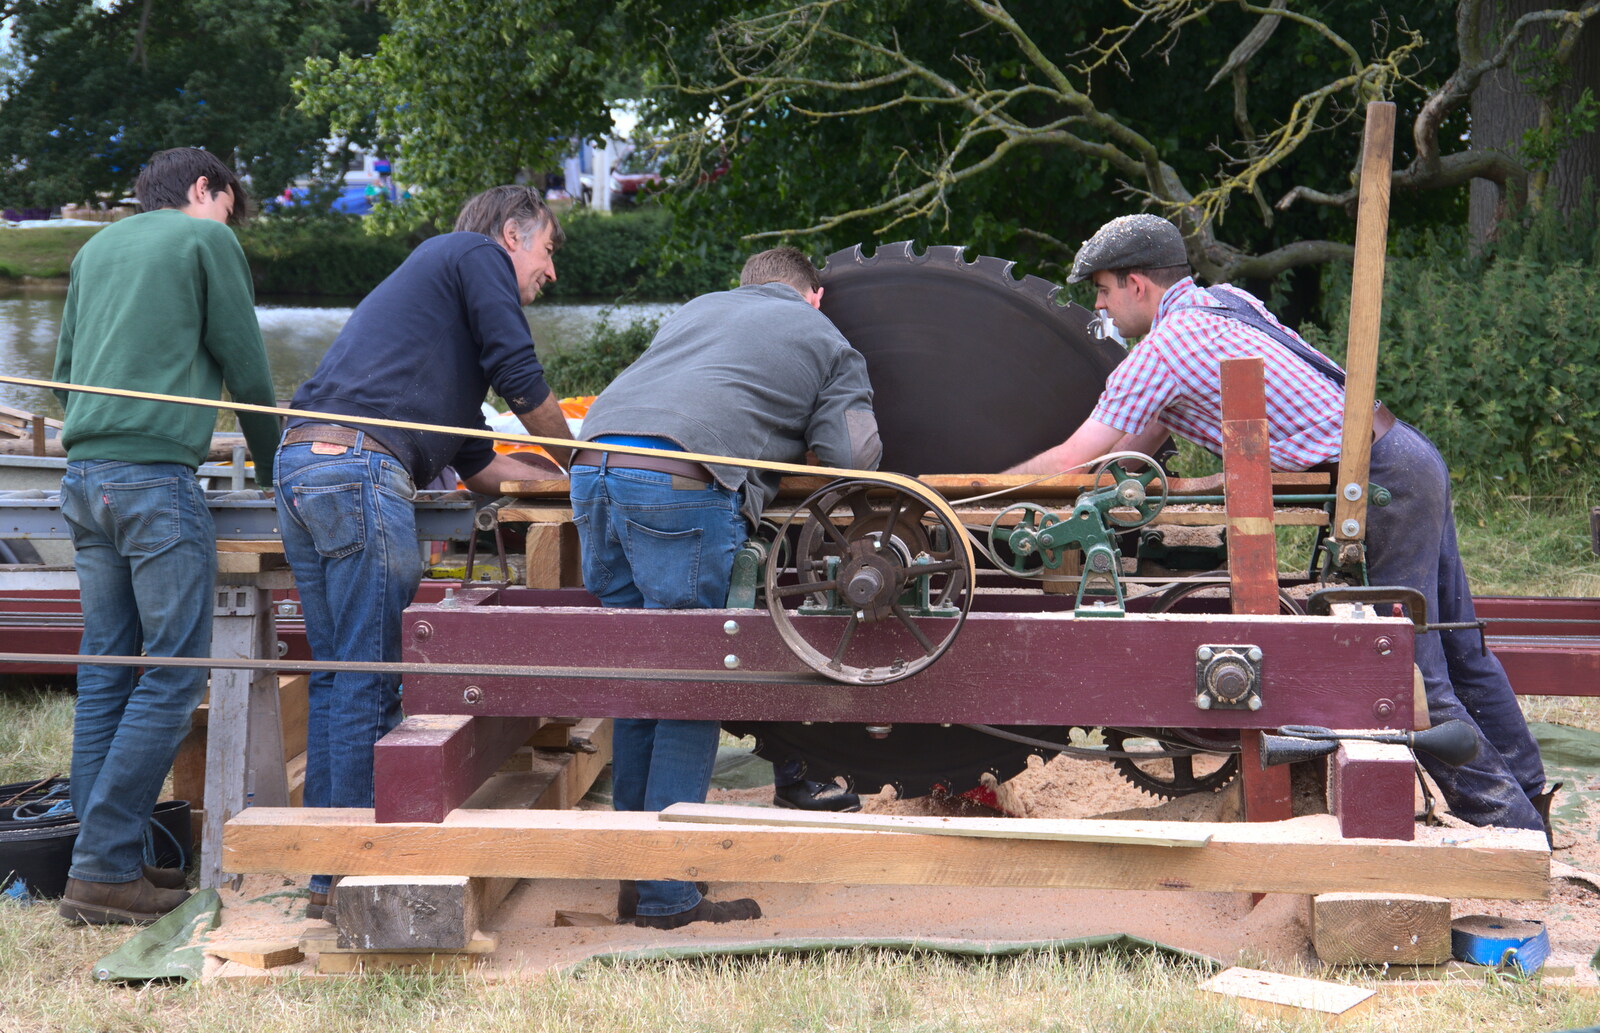 The giant steam-powered saw has paused from The Formerly-Known-As-The-Eye-Show, Palgrave, Suffolk - 17th June 2018